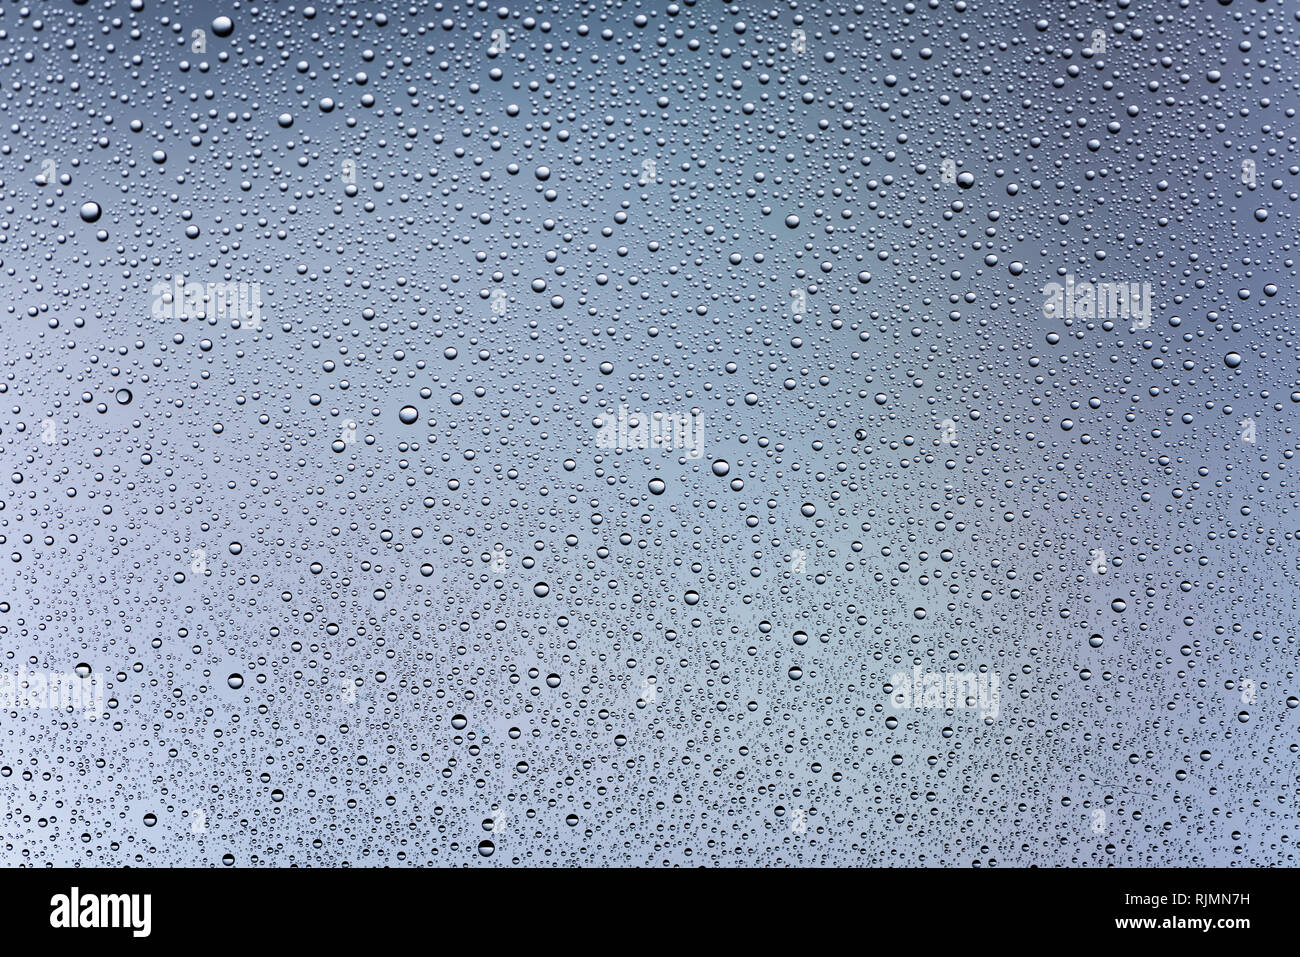 Drops of water on glass in a gray background. Abstraction. Stock Photo